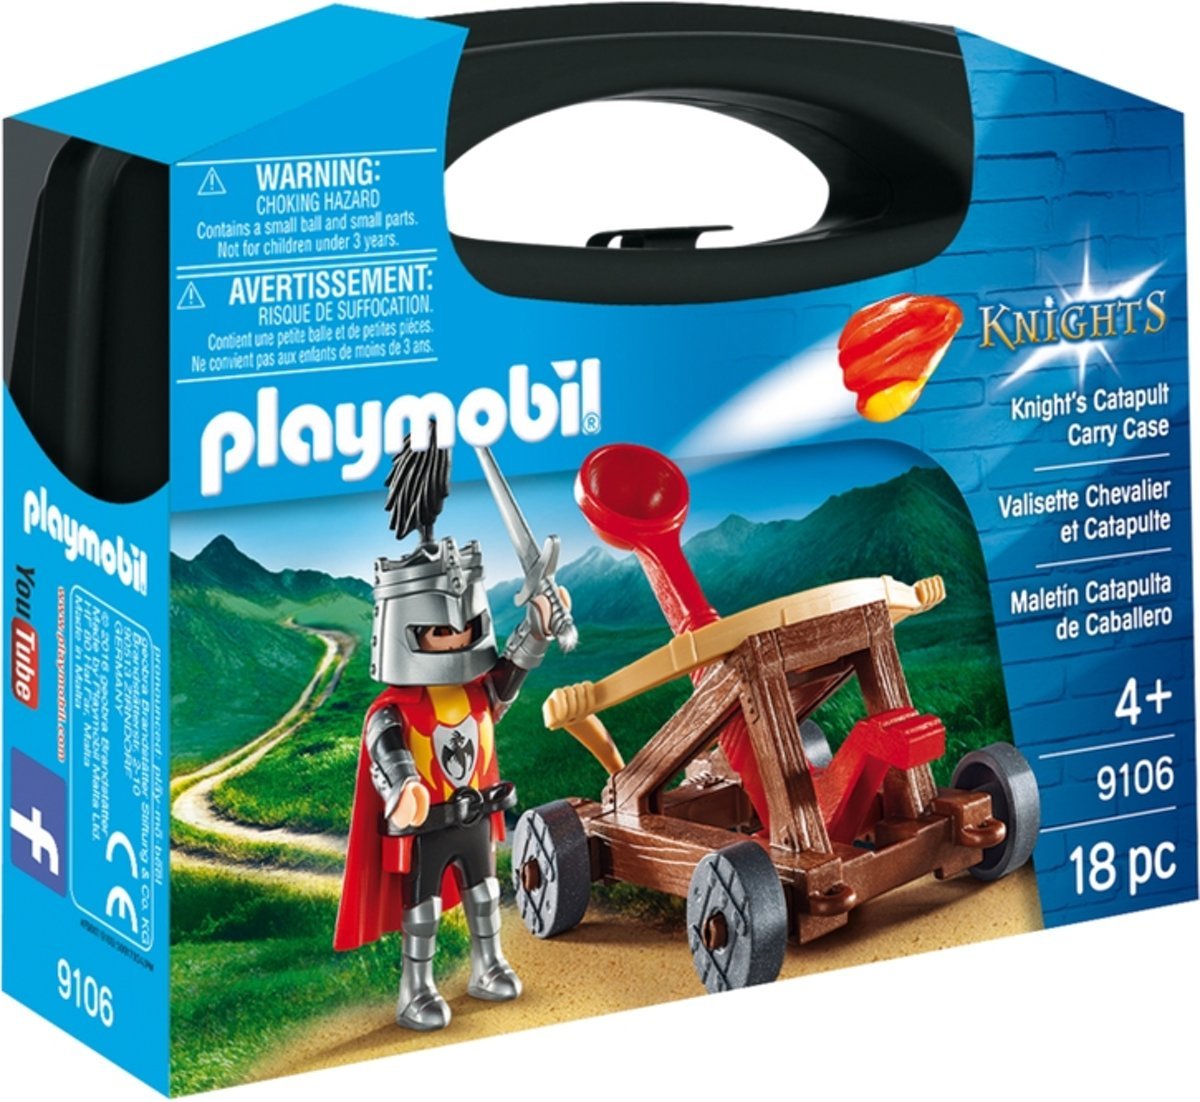 Playmobil 9106 Knights Catapult Carry Case